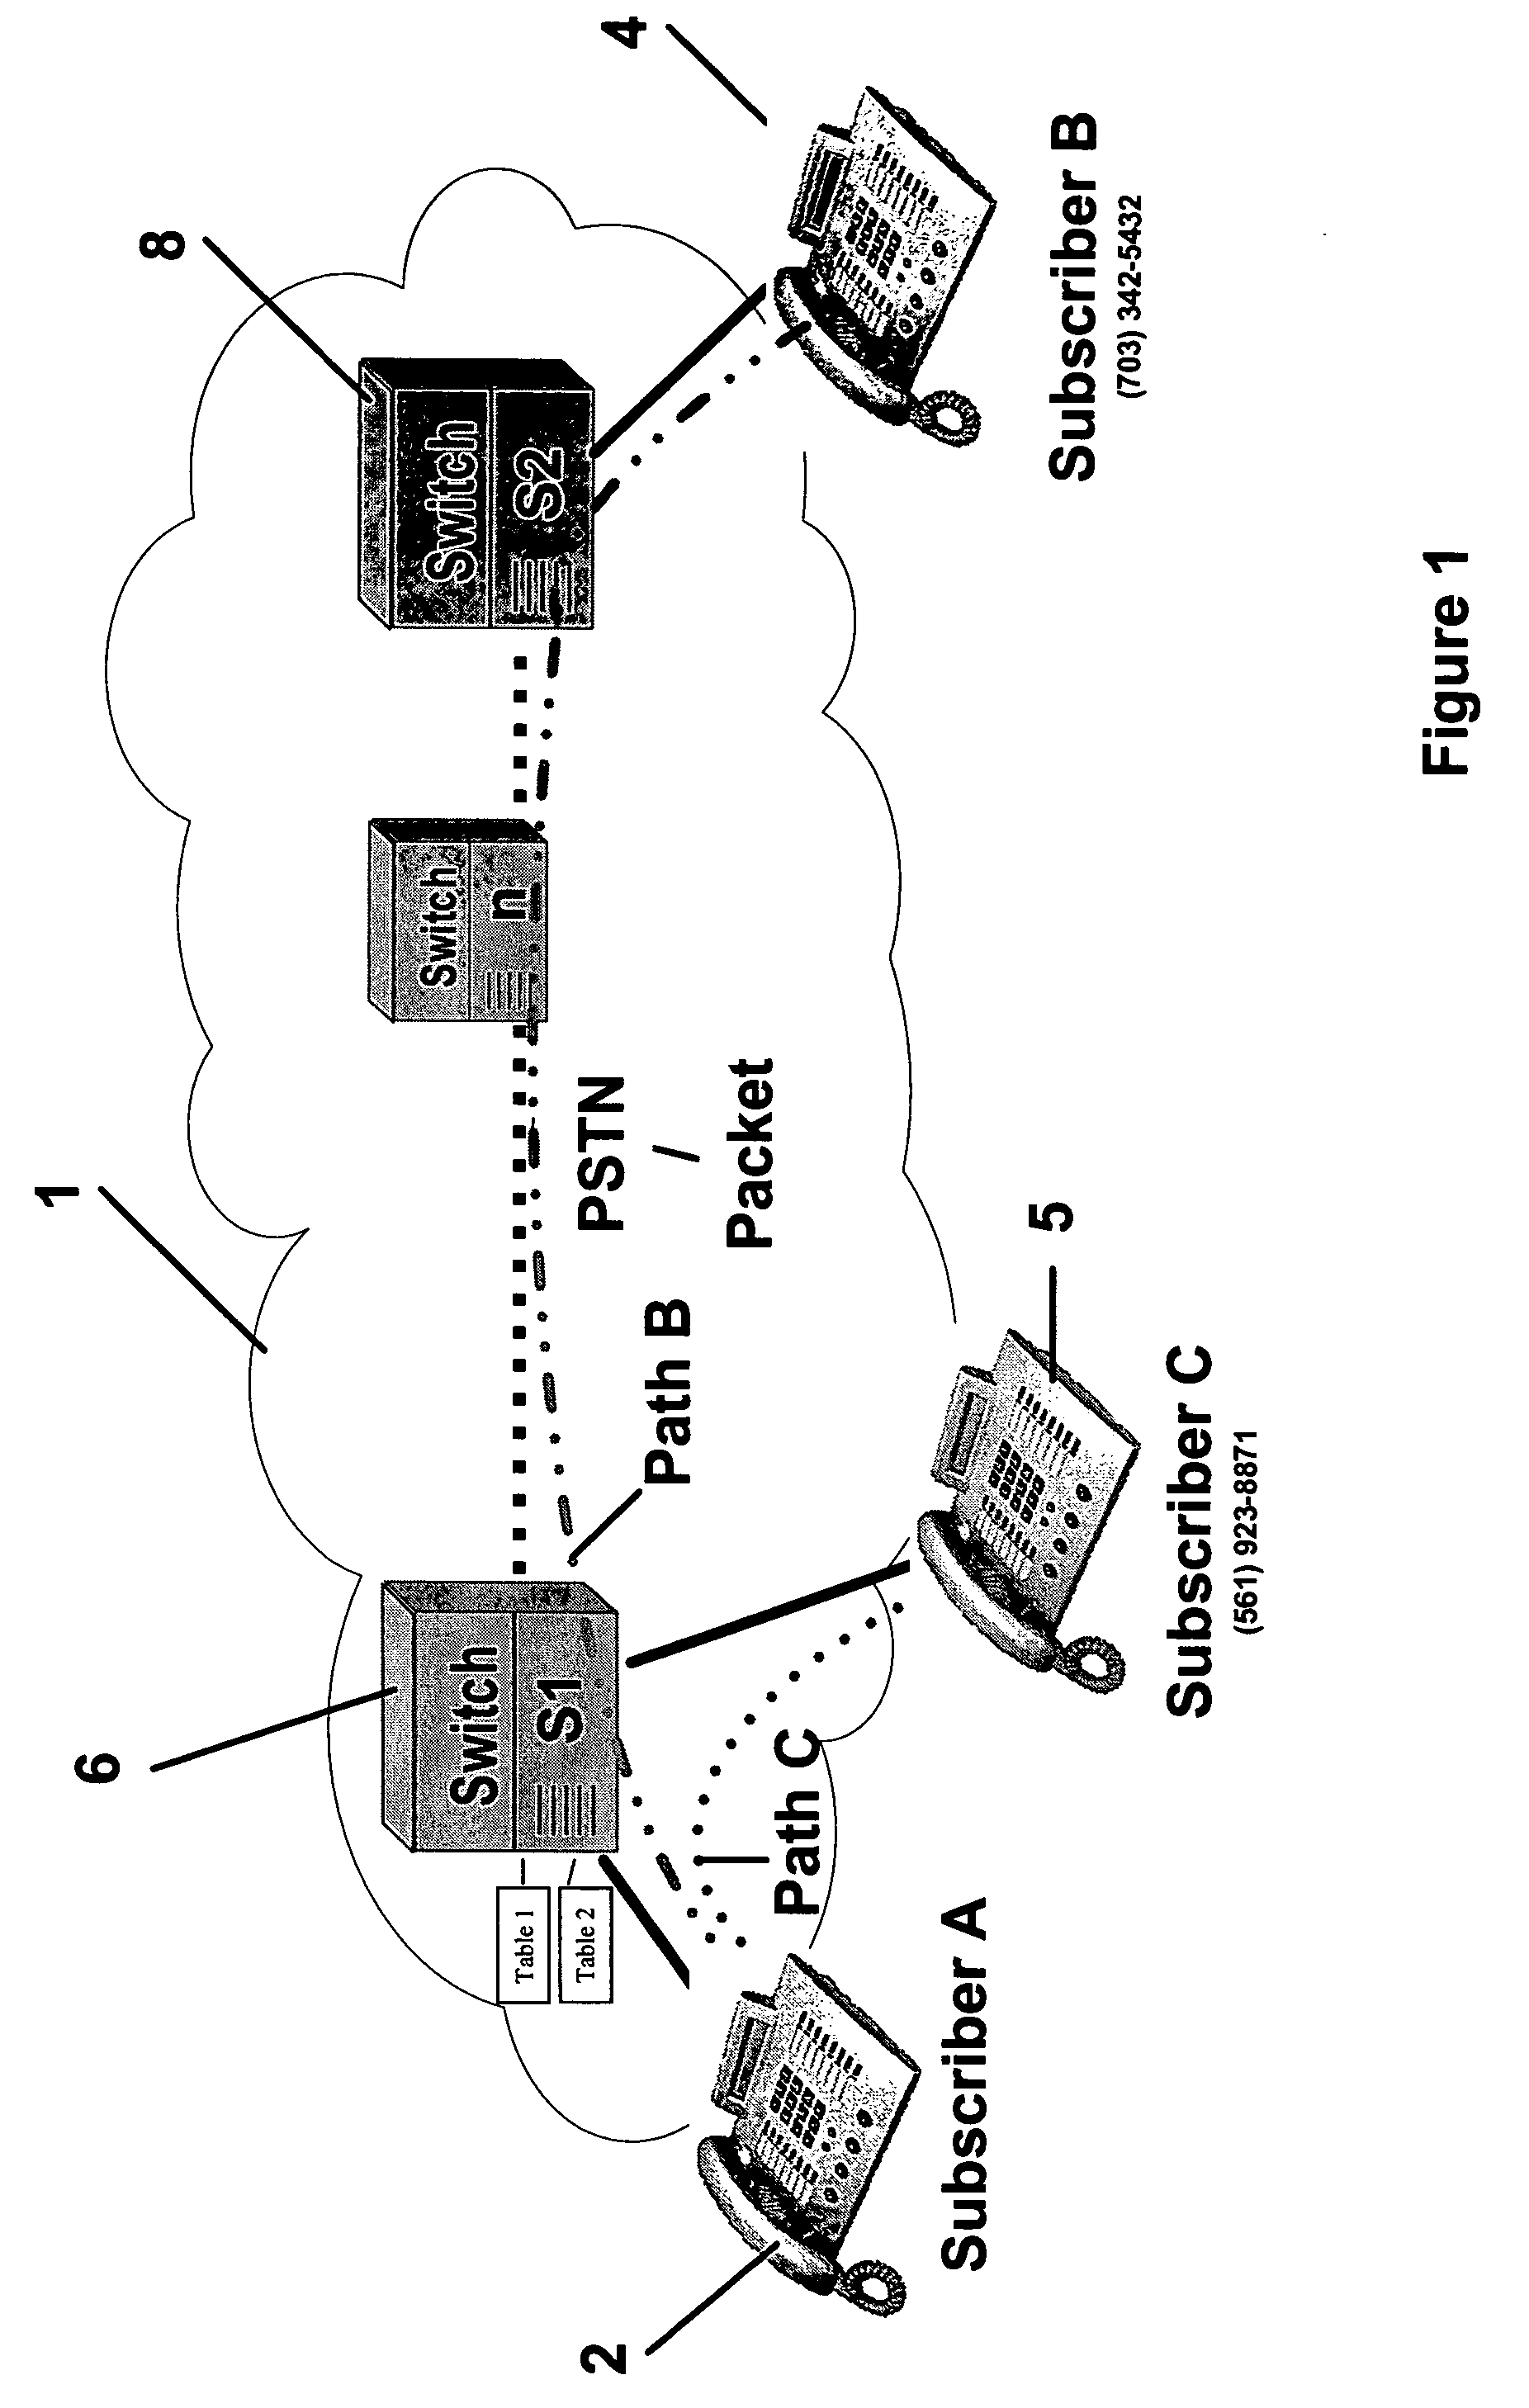 Method of routing signals through communication networks